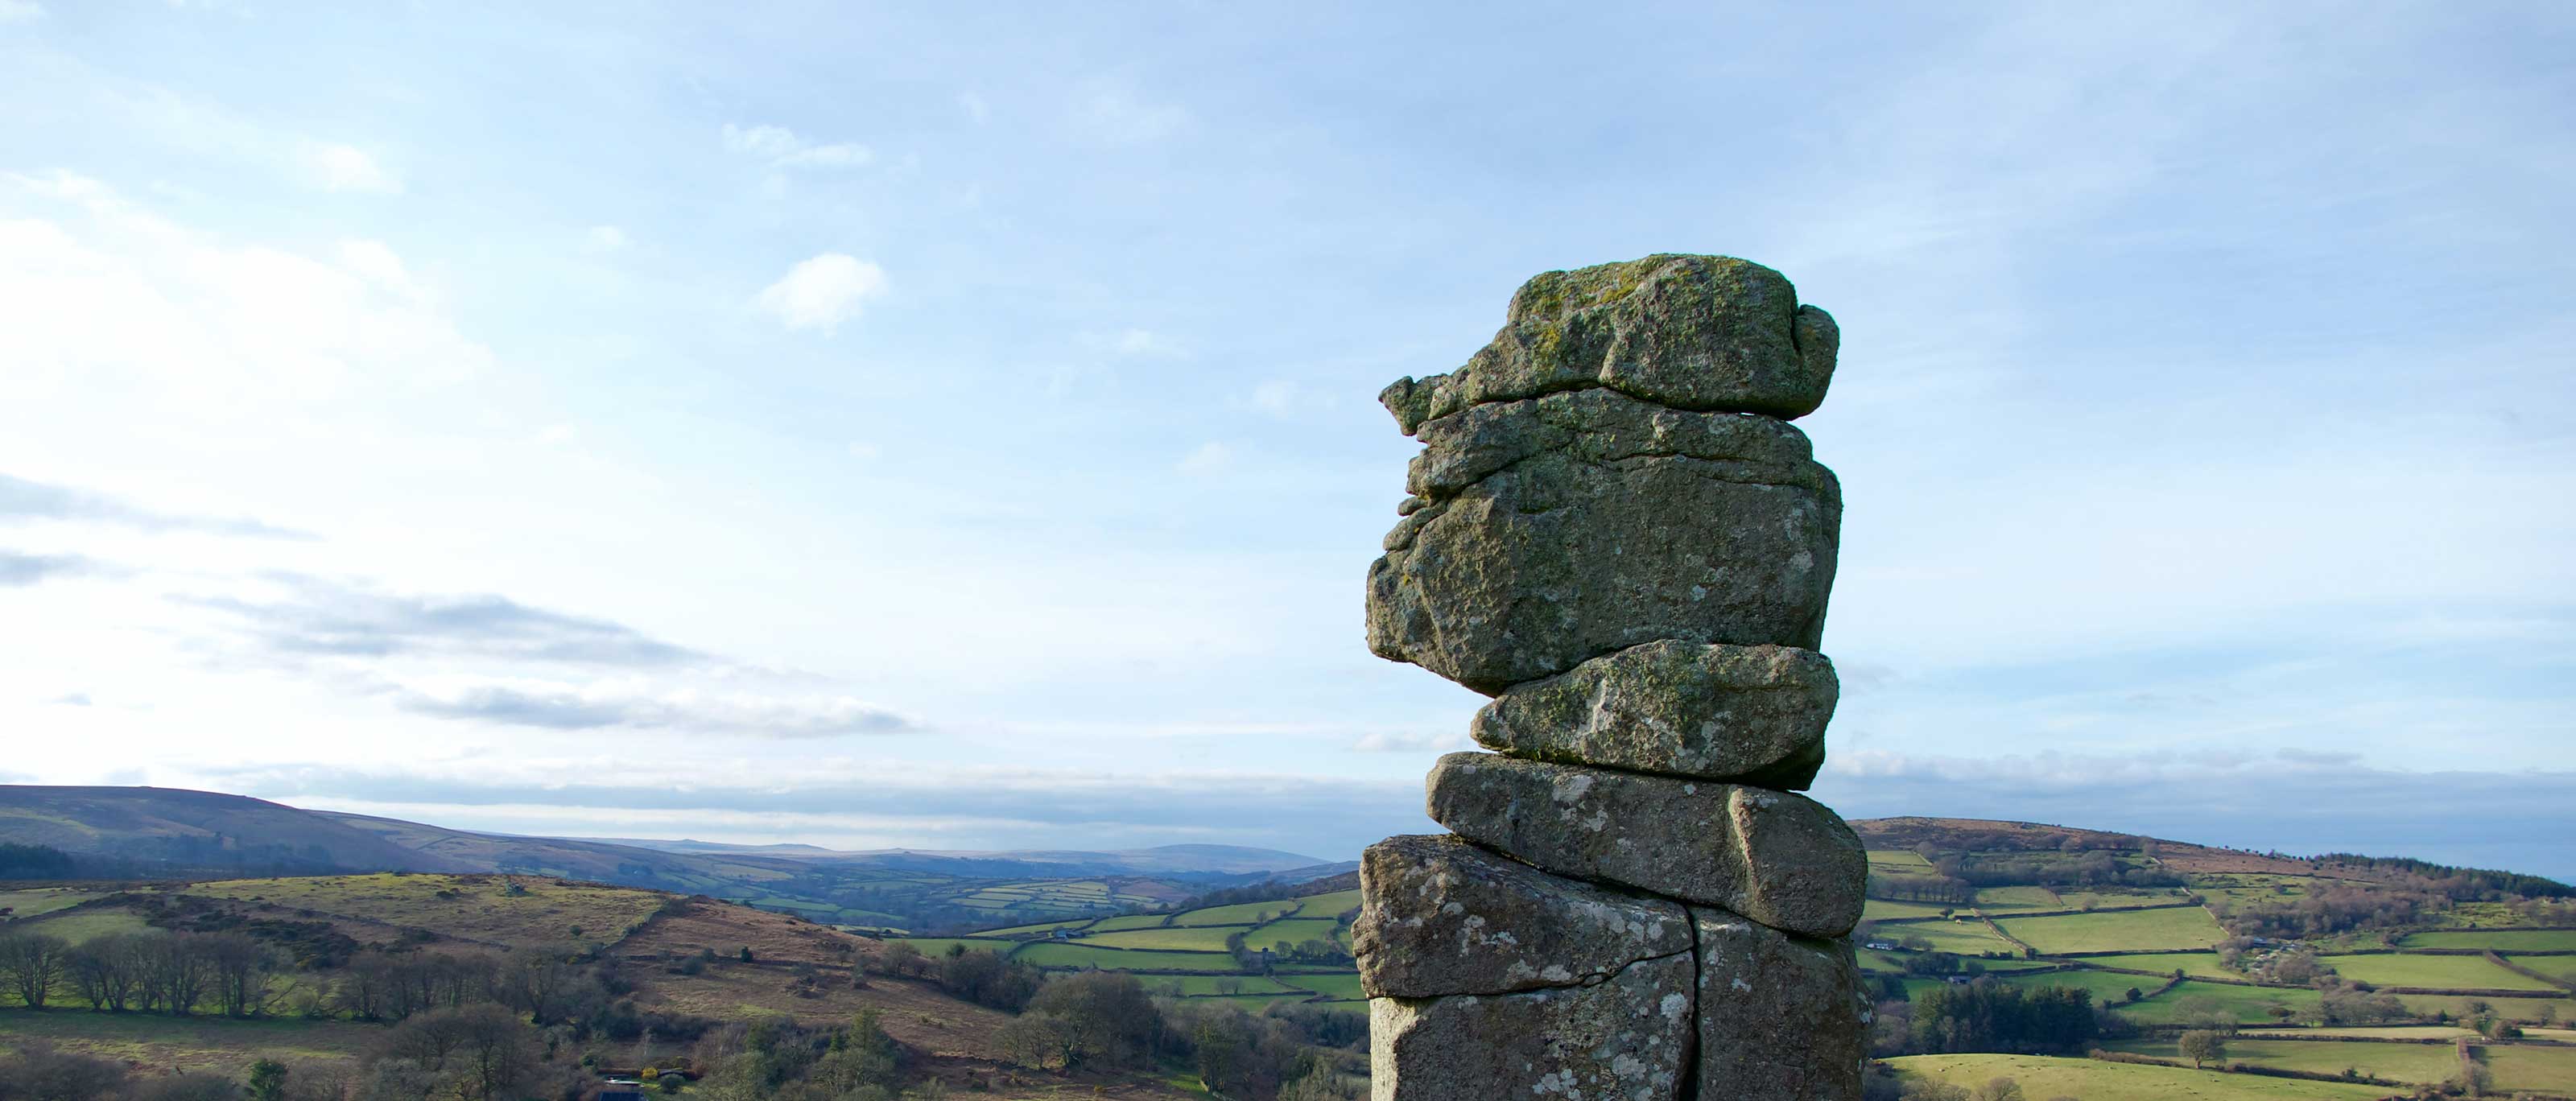 The granite pinnacle of Bowerman’s Nose, a well-known Dartmoor landmark. Photo by Terry Montague on Unsplash